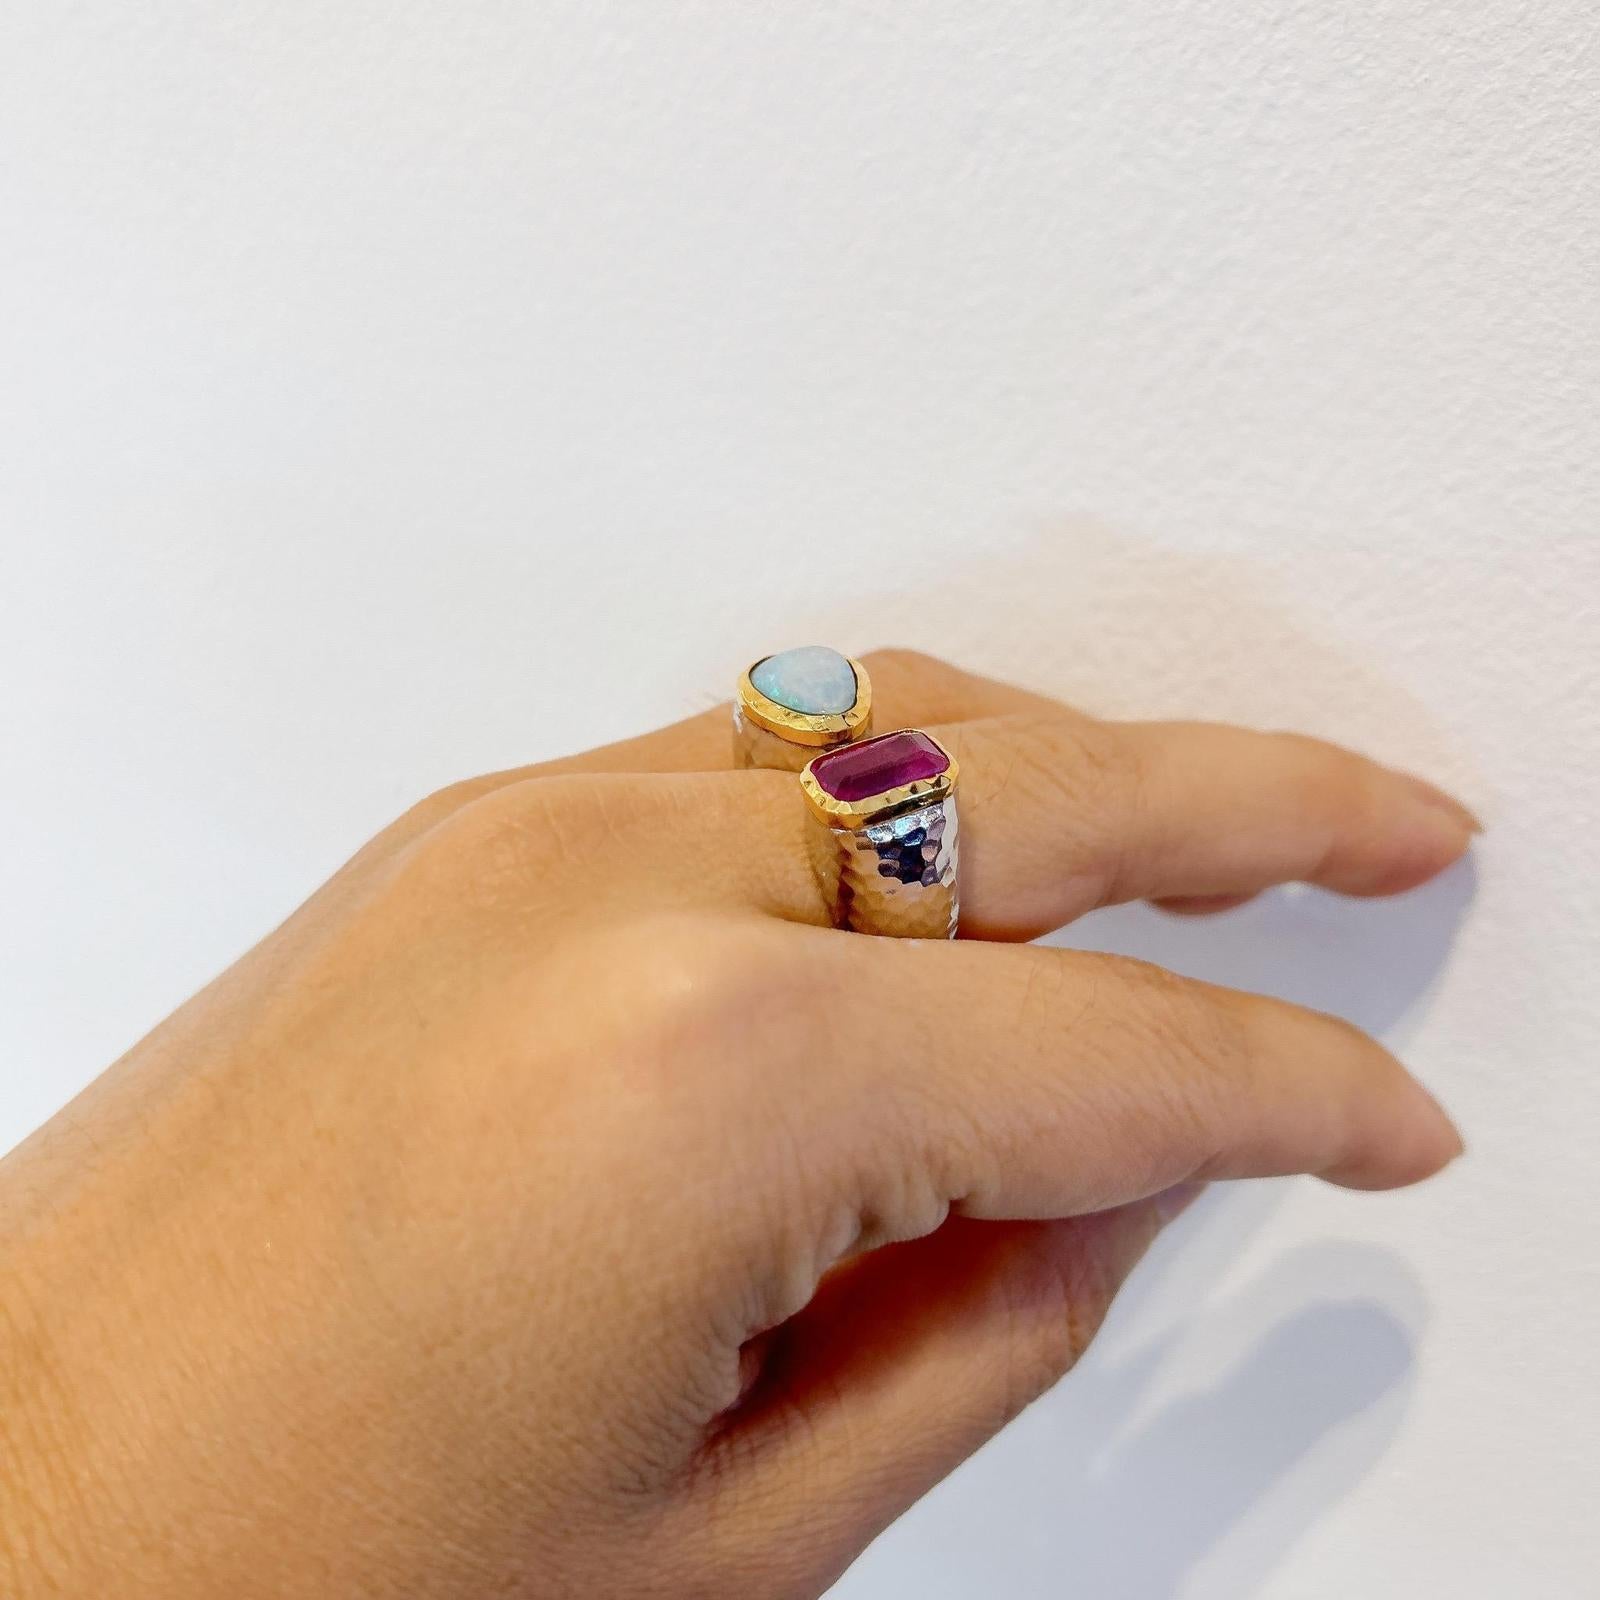 Cabochon Bochic “Capri” Blue Opal & Red Ruby Cocktail Ring 18k Gold & Silver For Sale